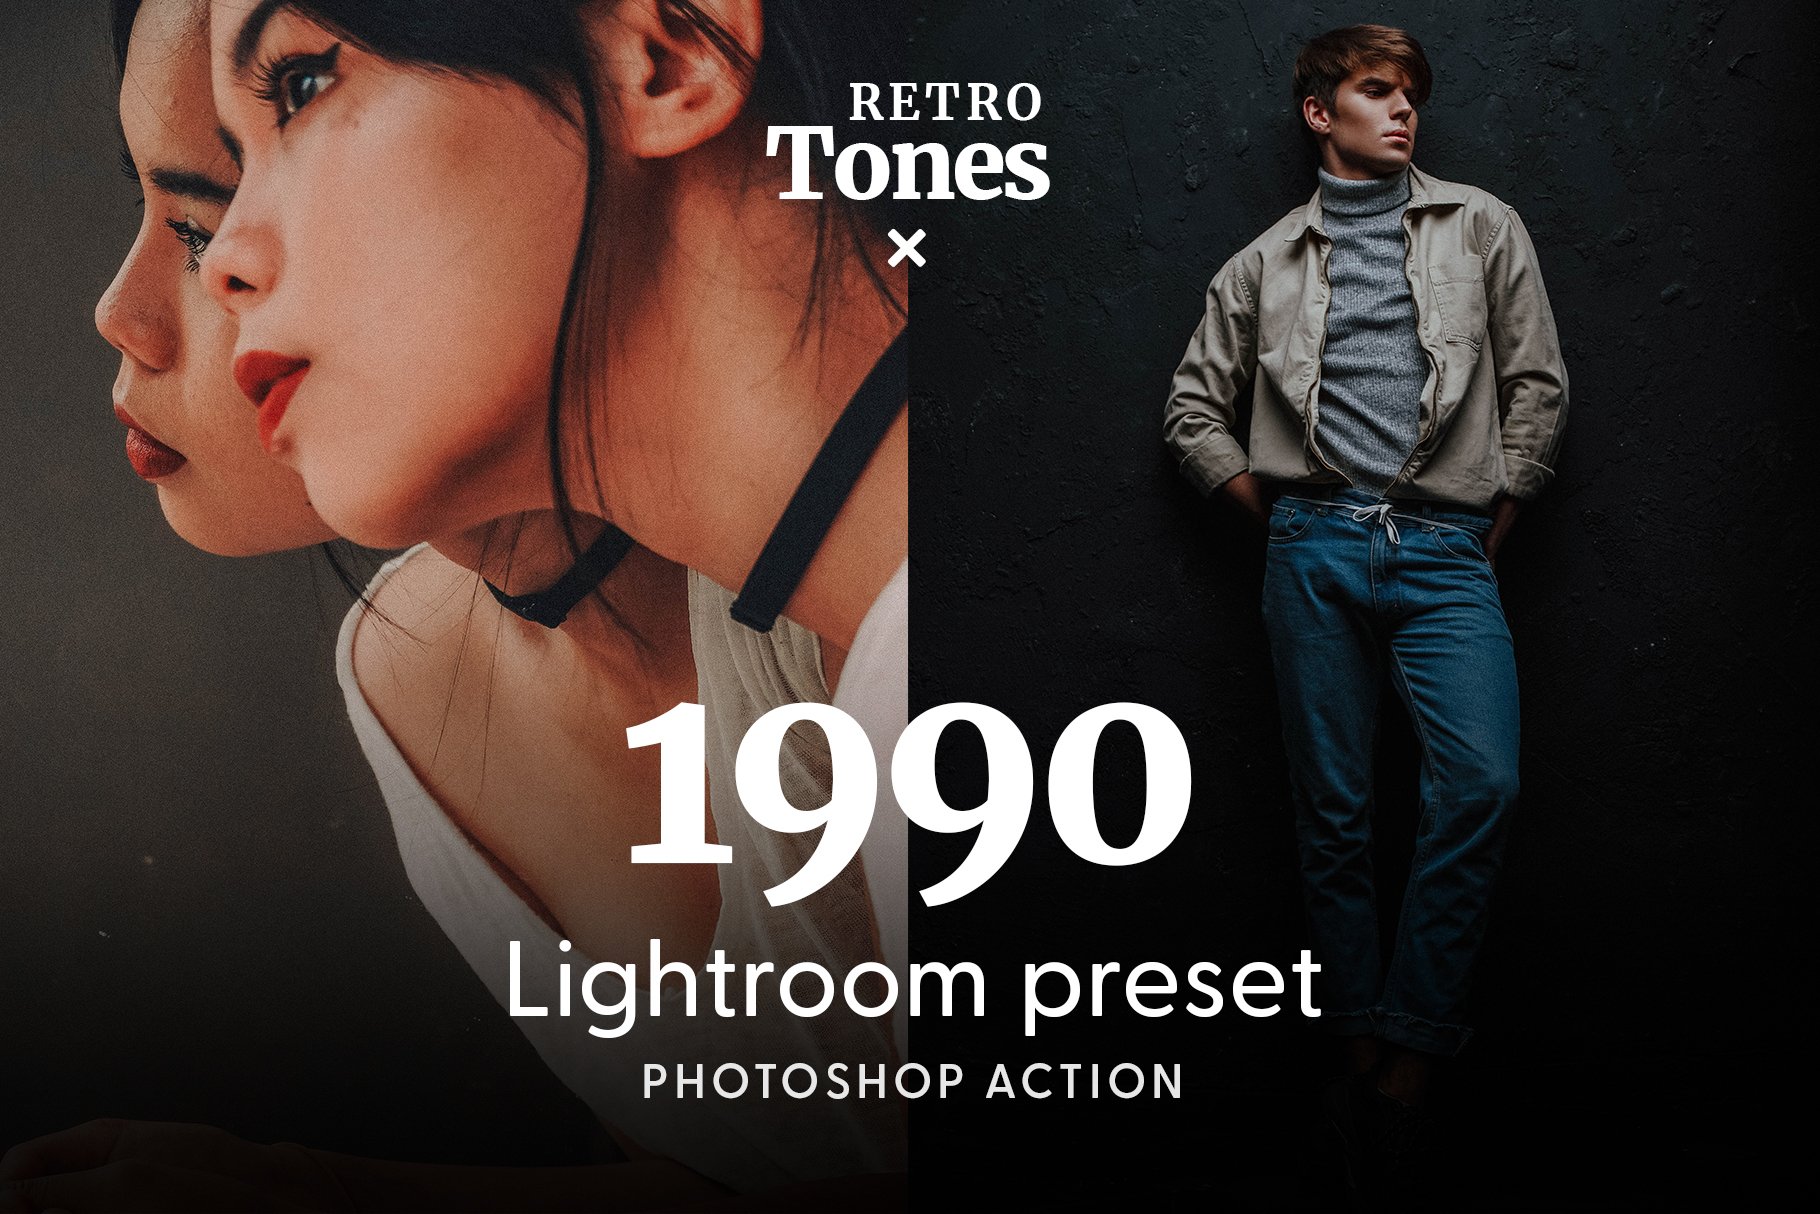 1990s Retro - Actions & Presetscover image.